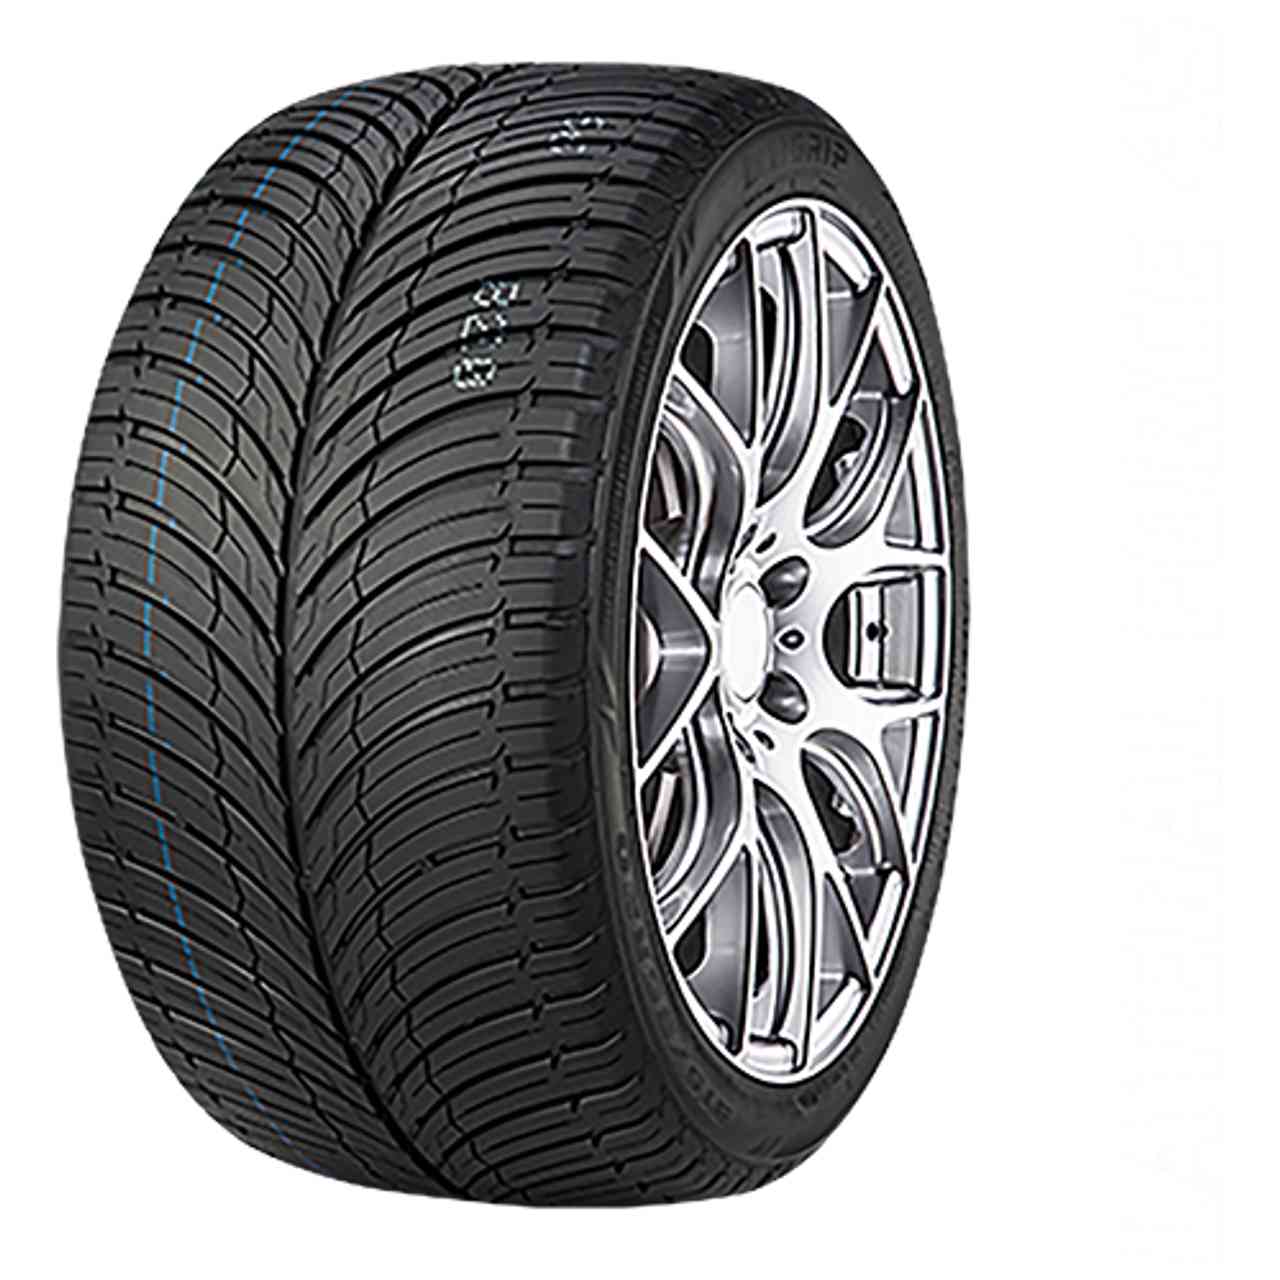 UNIGRIP LATERAL FORCE 4S 255/40R20 101W